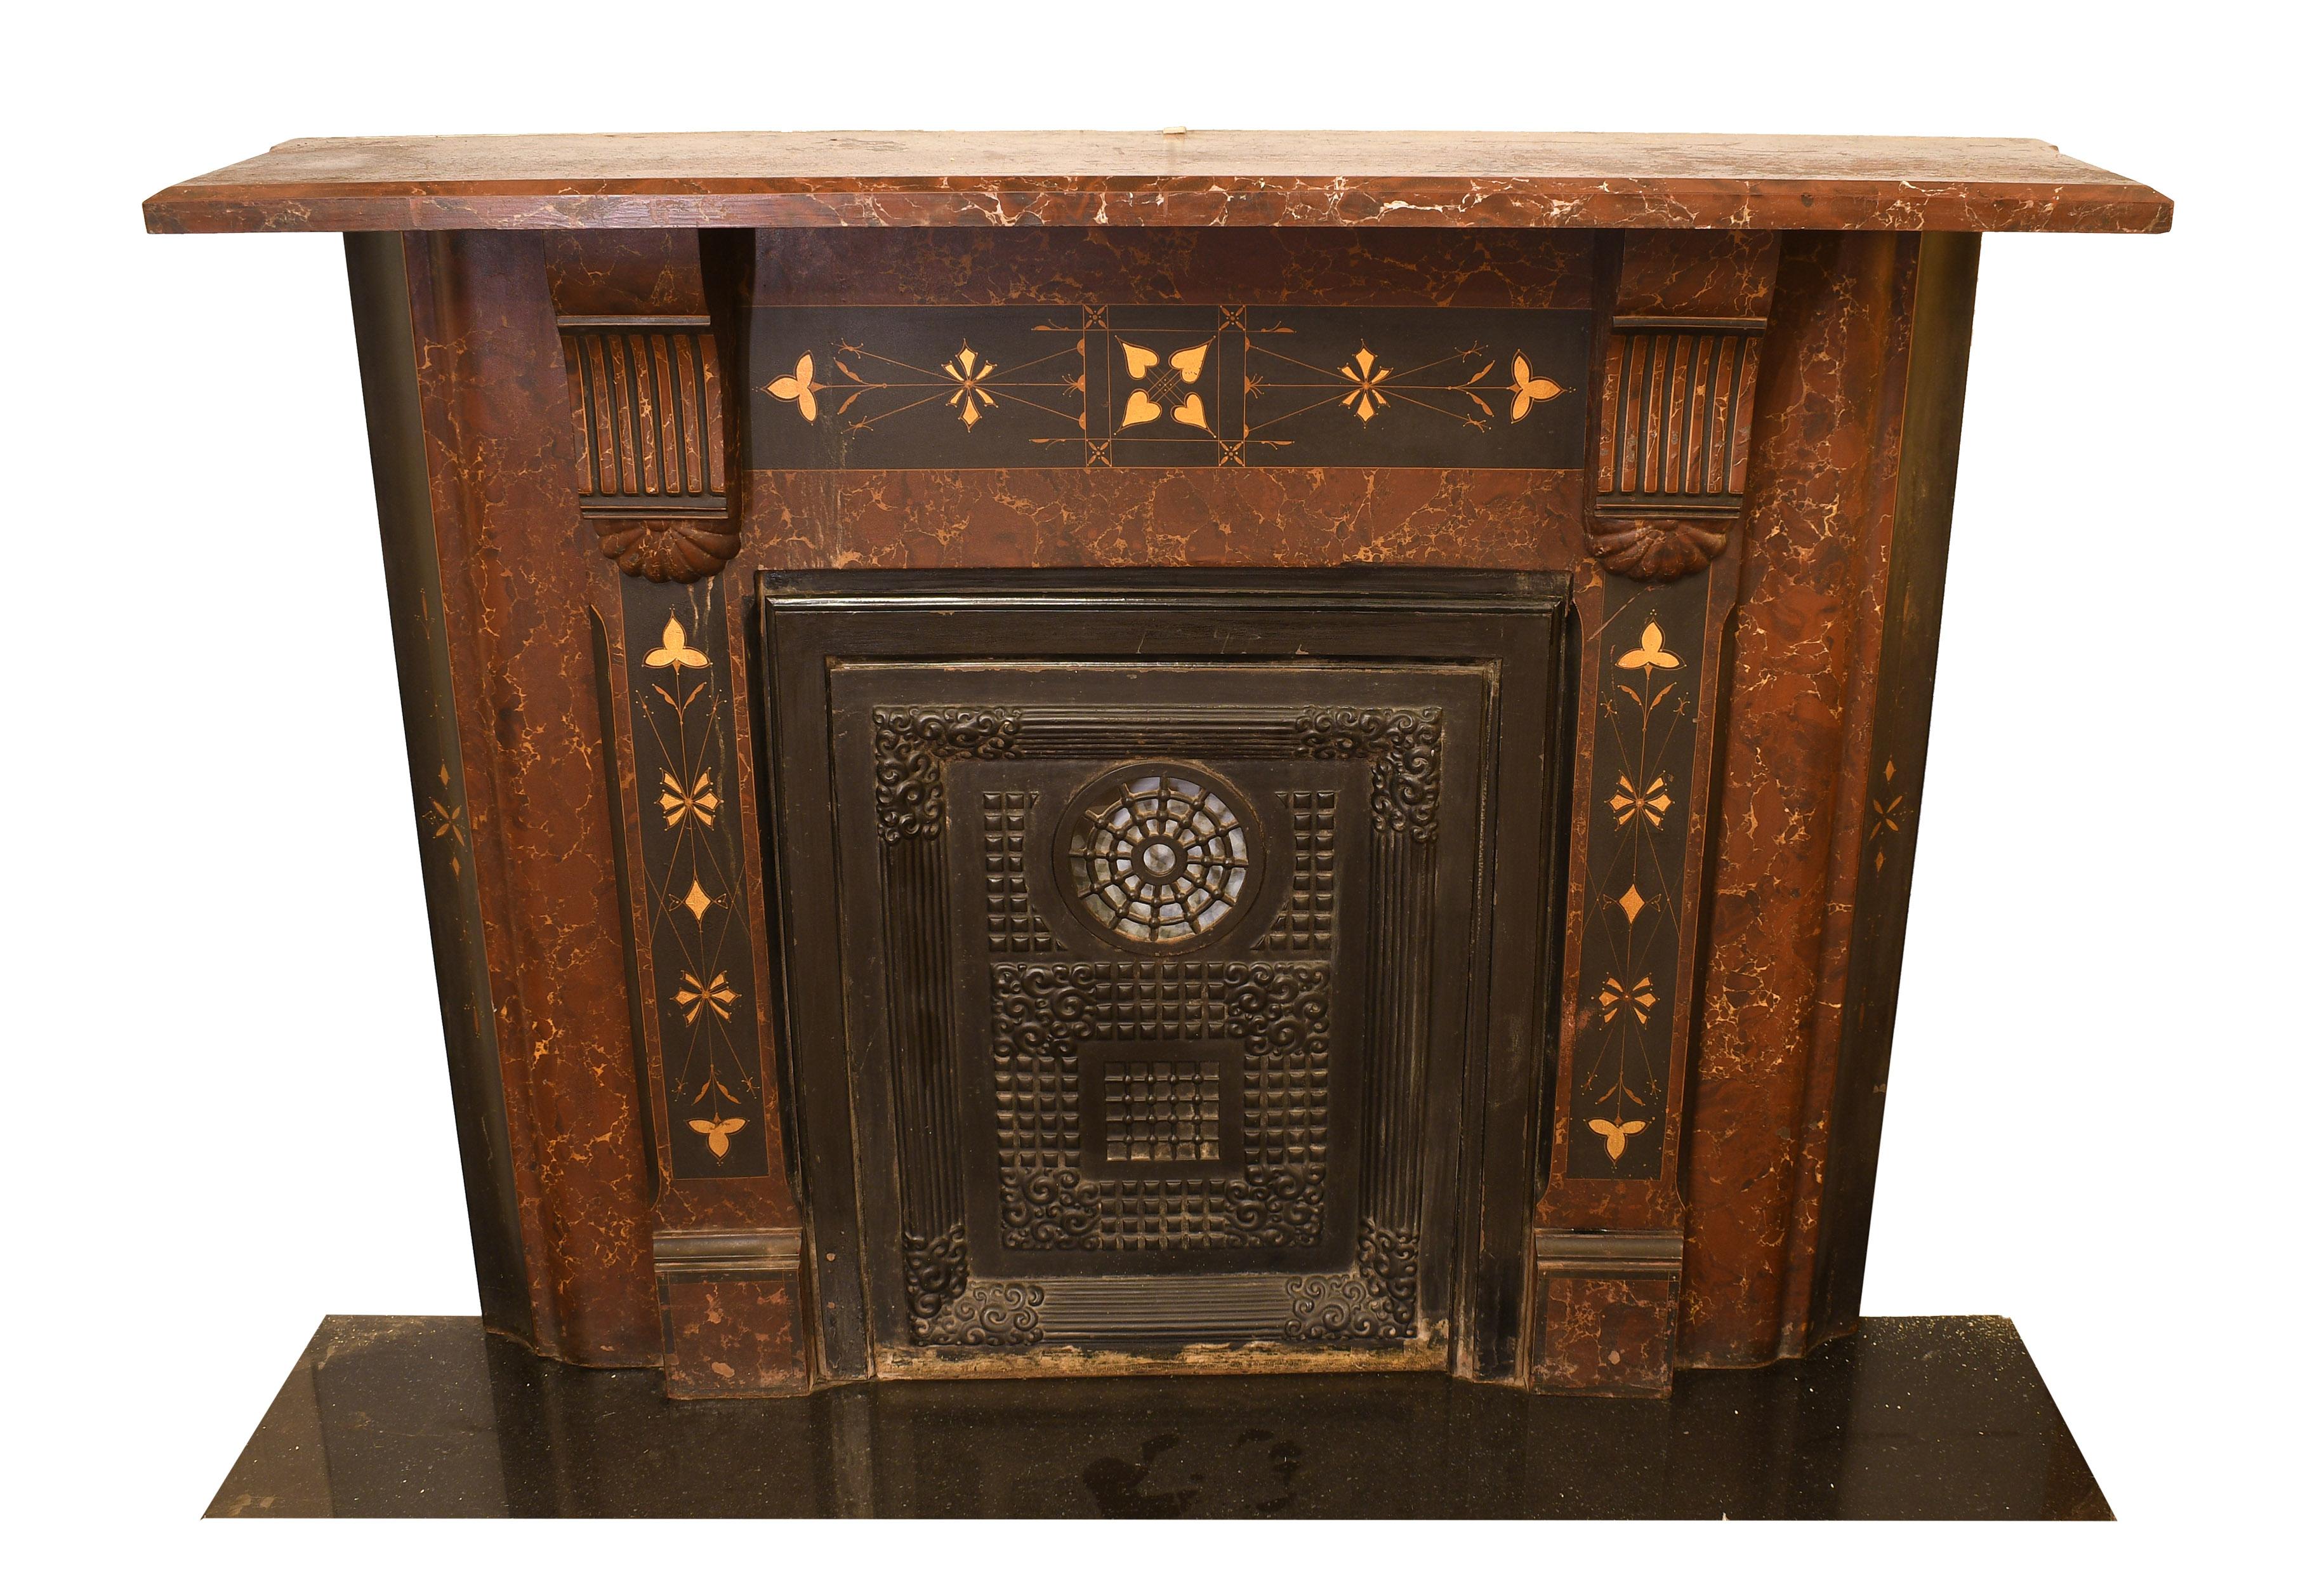 Late 1890s-1920s the cast iron mantel was a common fixture in smaller spaces because of it thin 12” profile. Iconic, simple, clean lines dominate and enhance this Classic look with its faux stone paint, slate top and summer cover make this piece fit